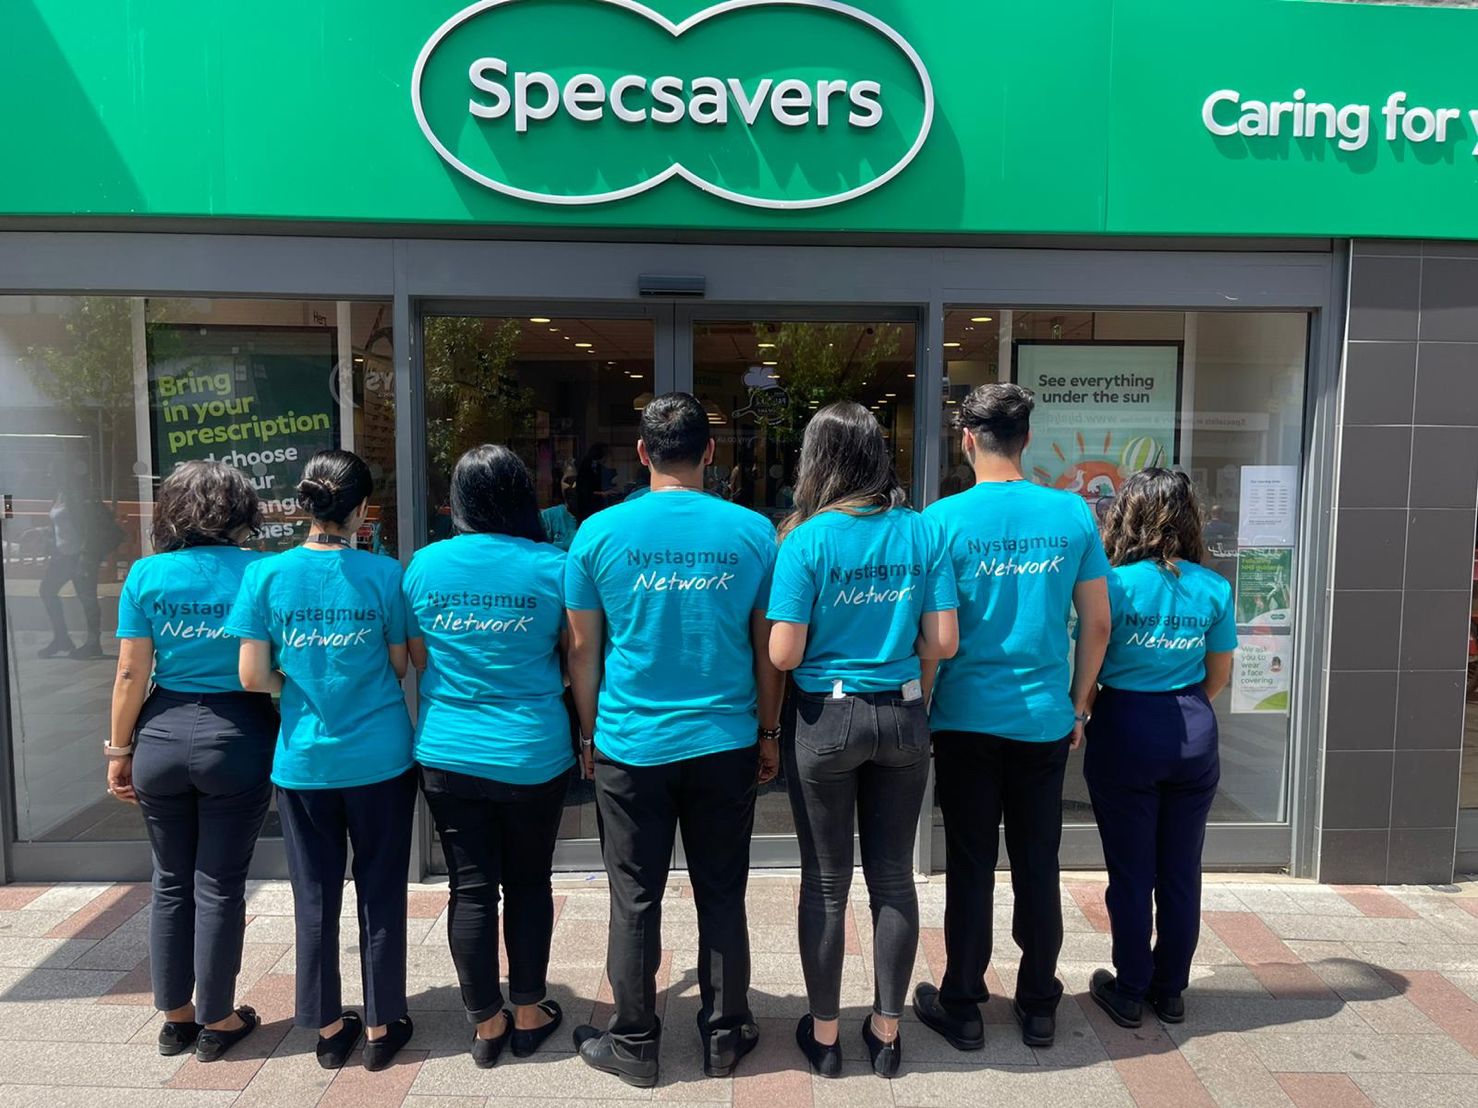 A row of people stand outside Specsavers wearing Nystagmus Network T-shirts.